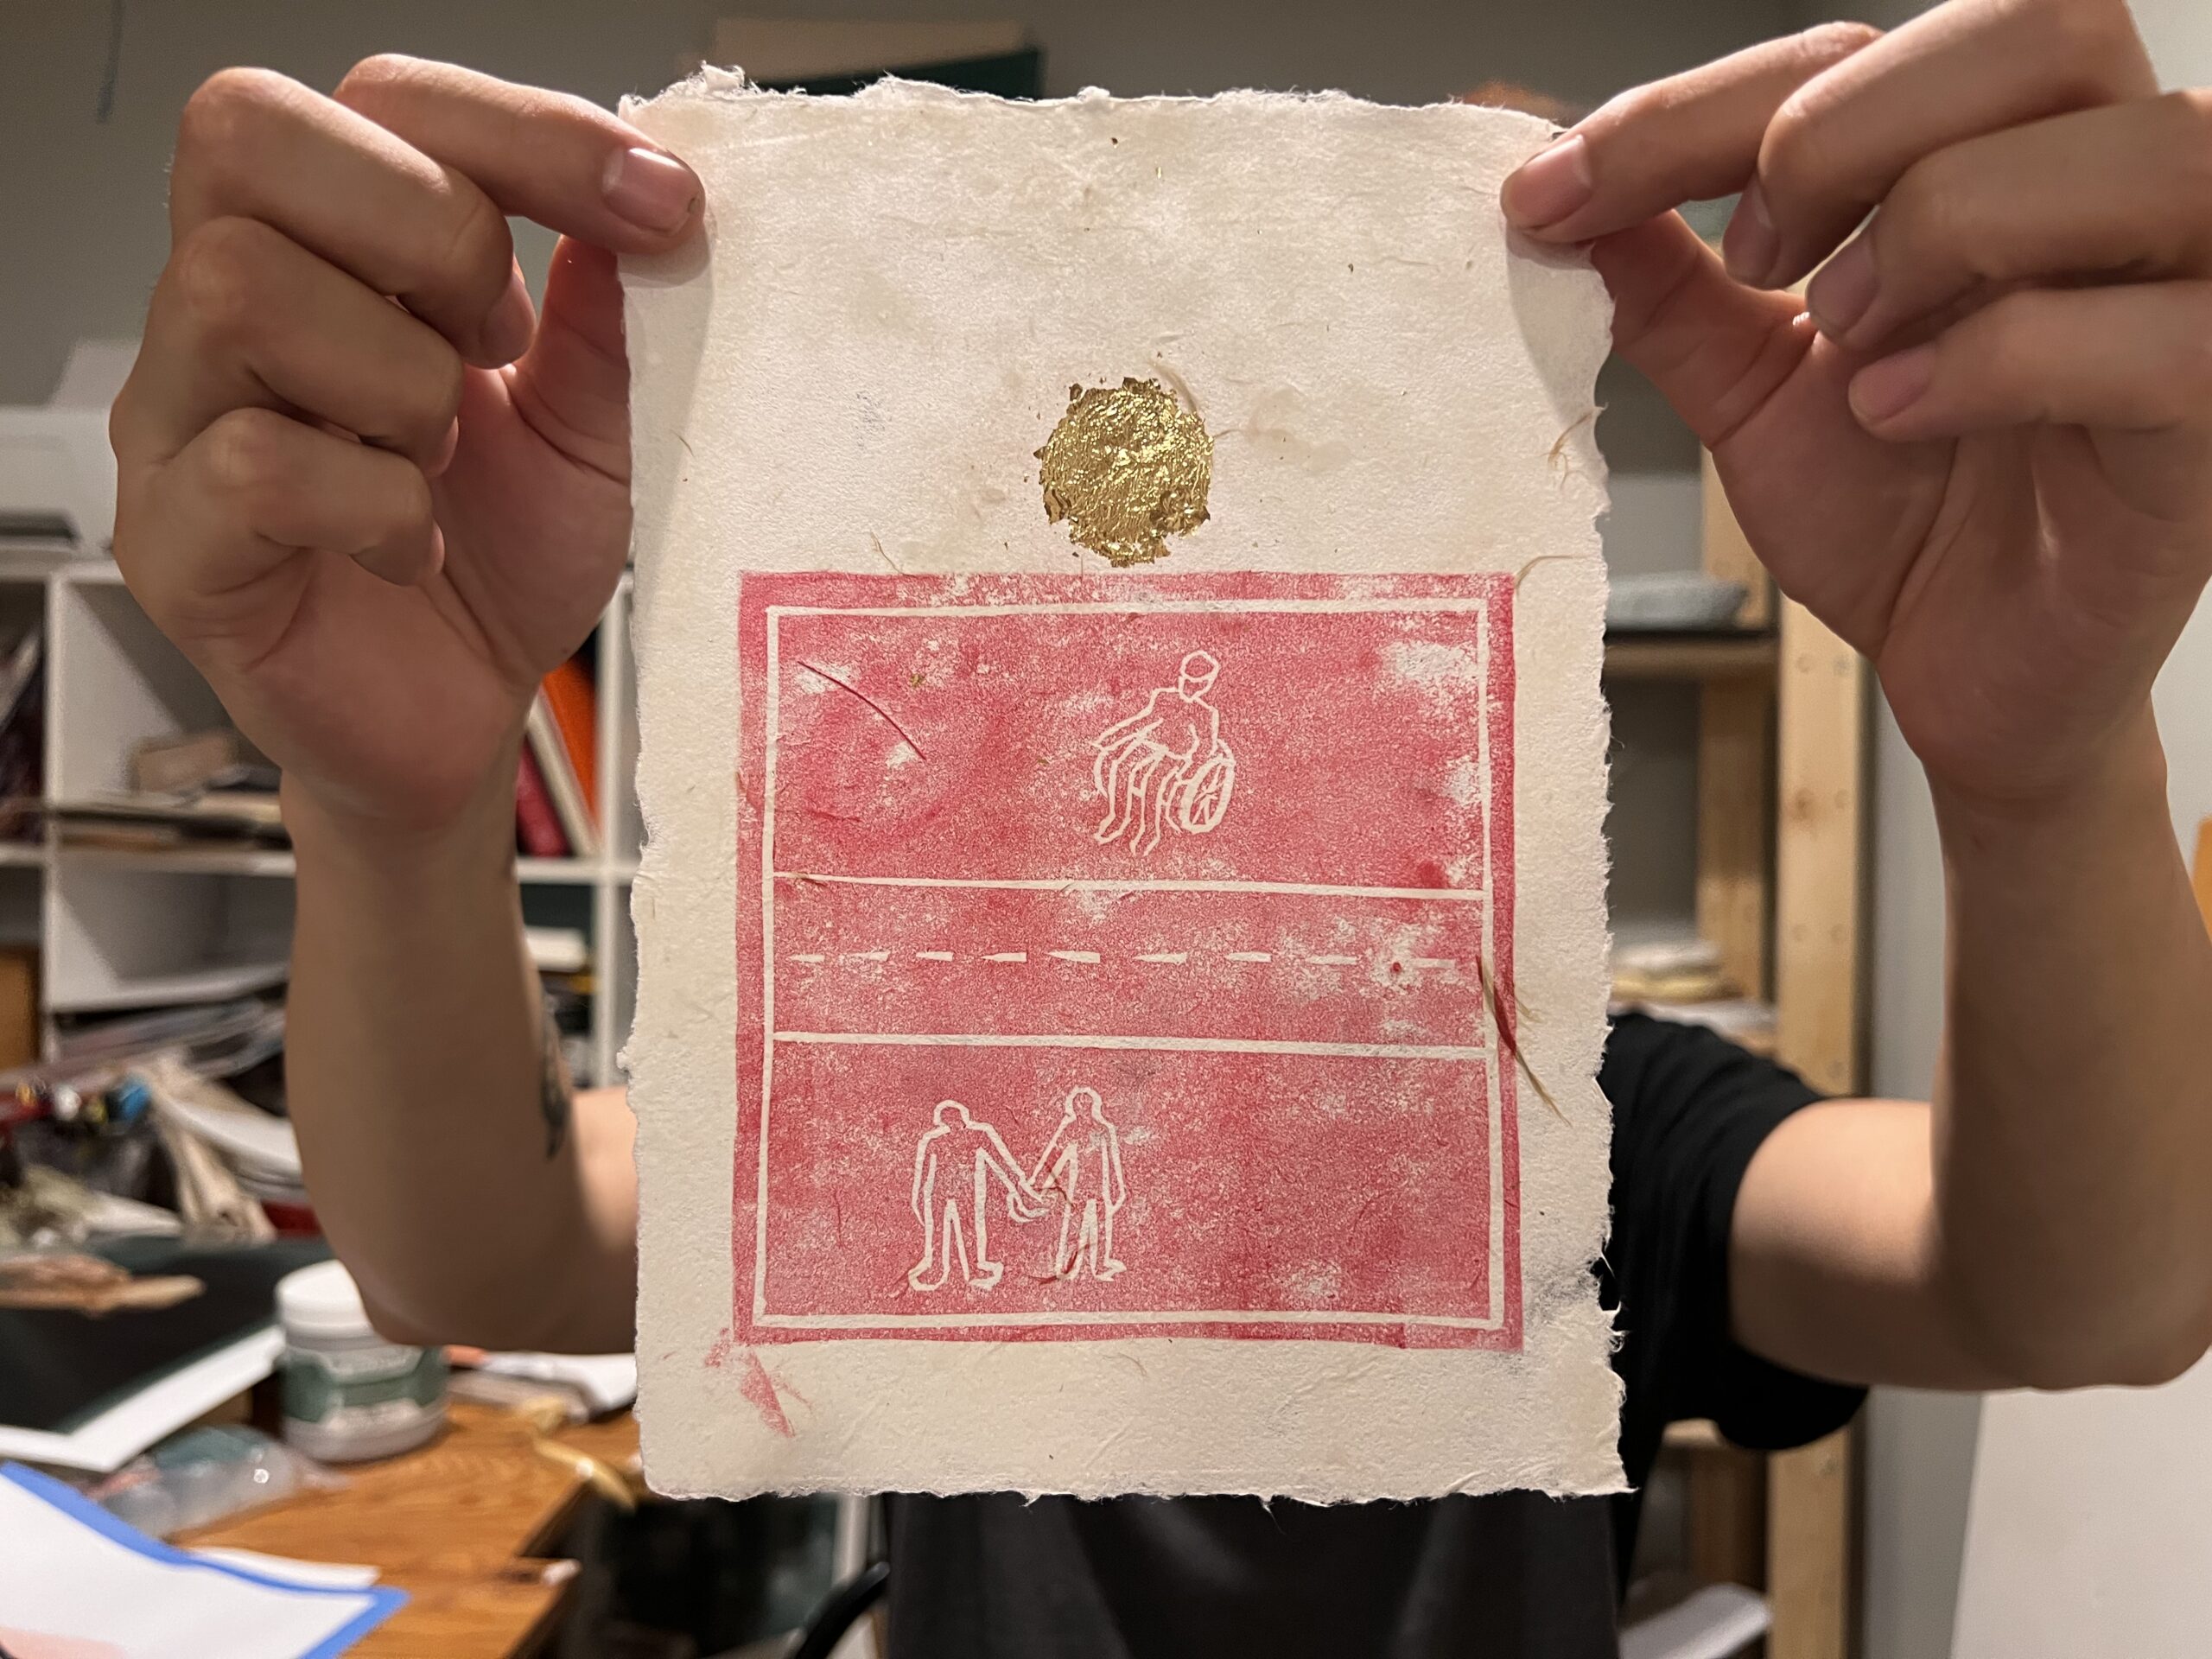 Hands holding up print with red design and gold seal above.